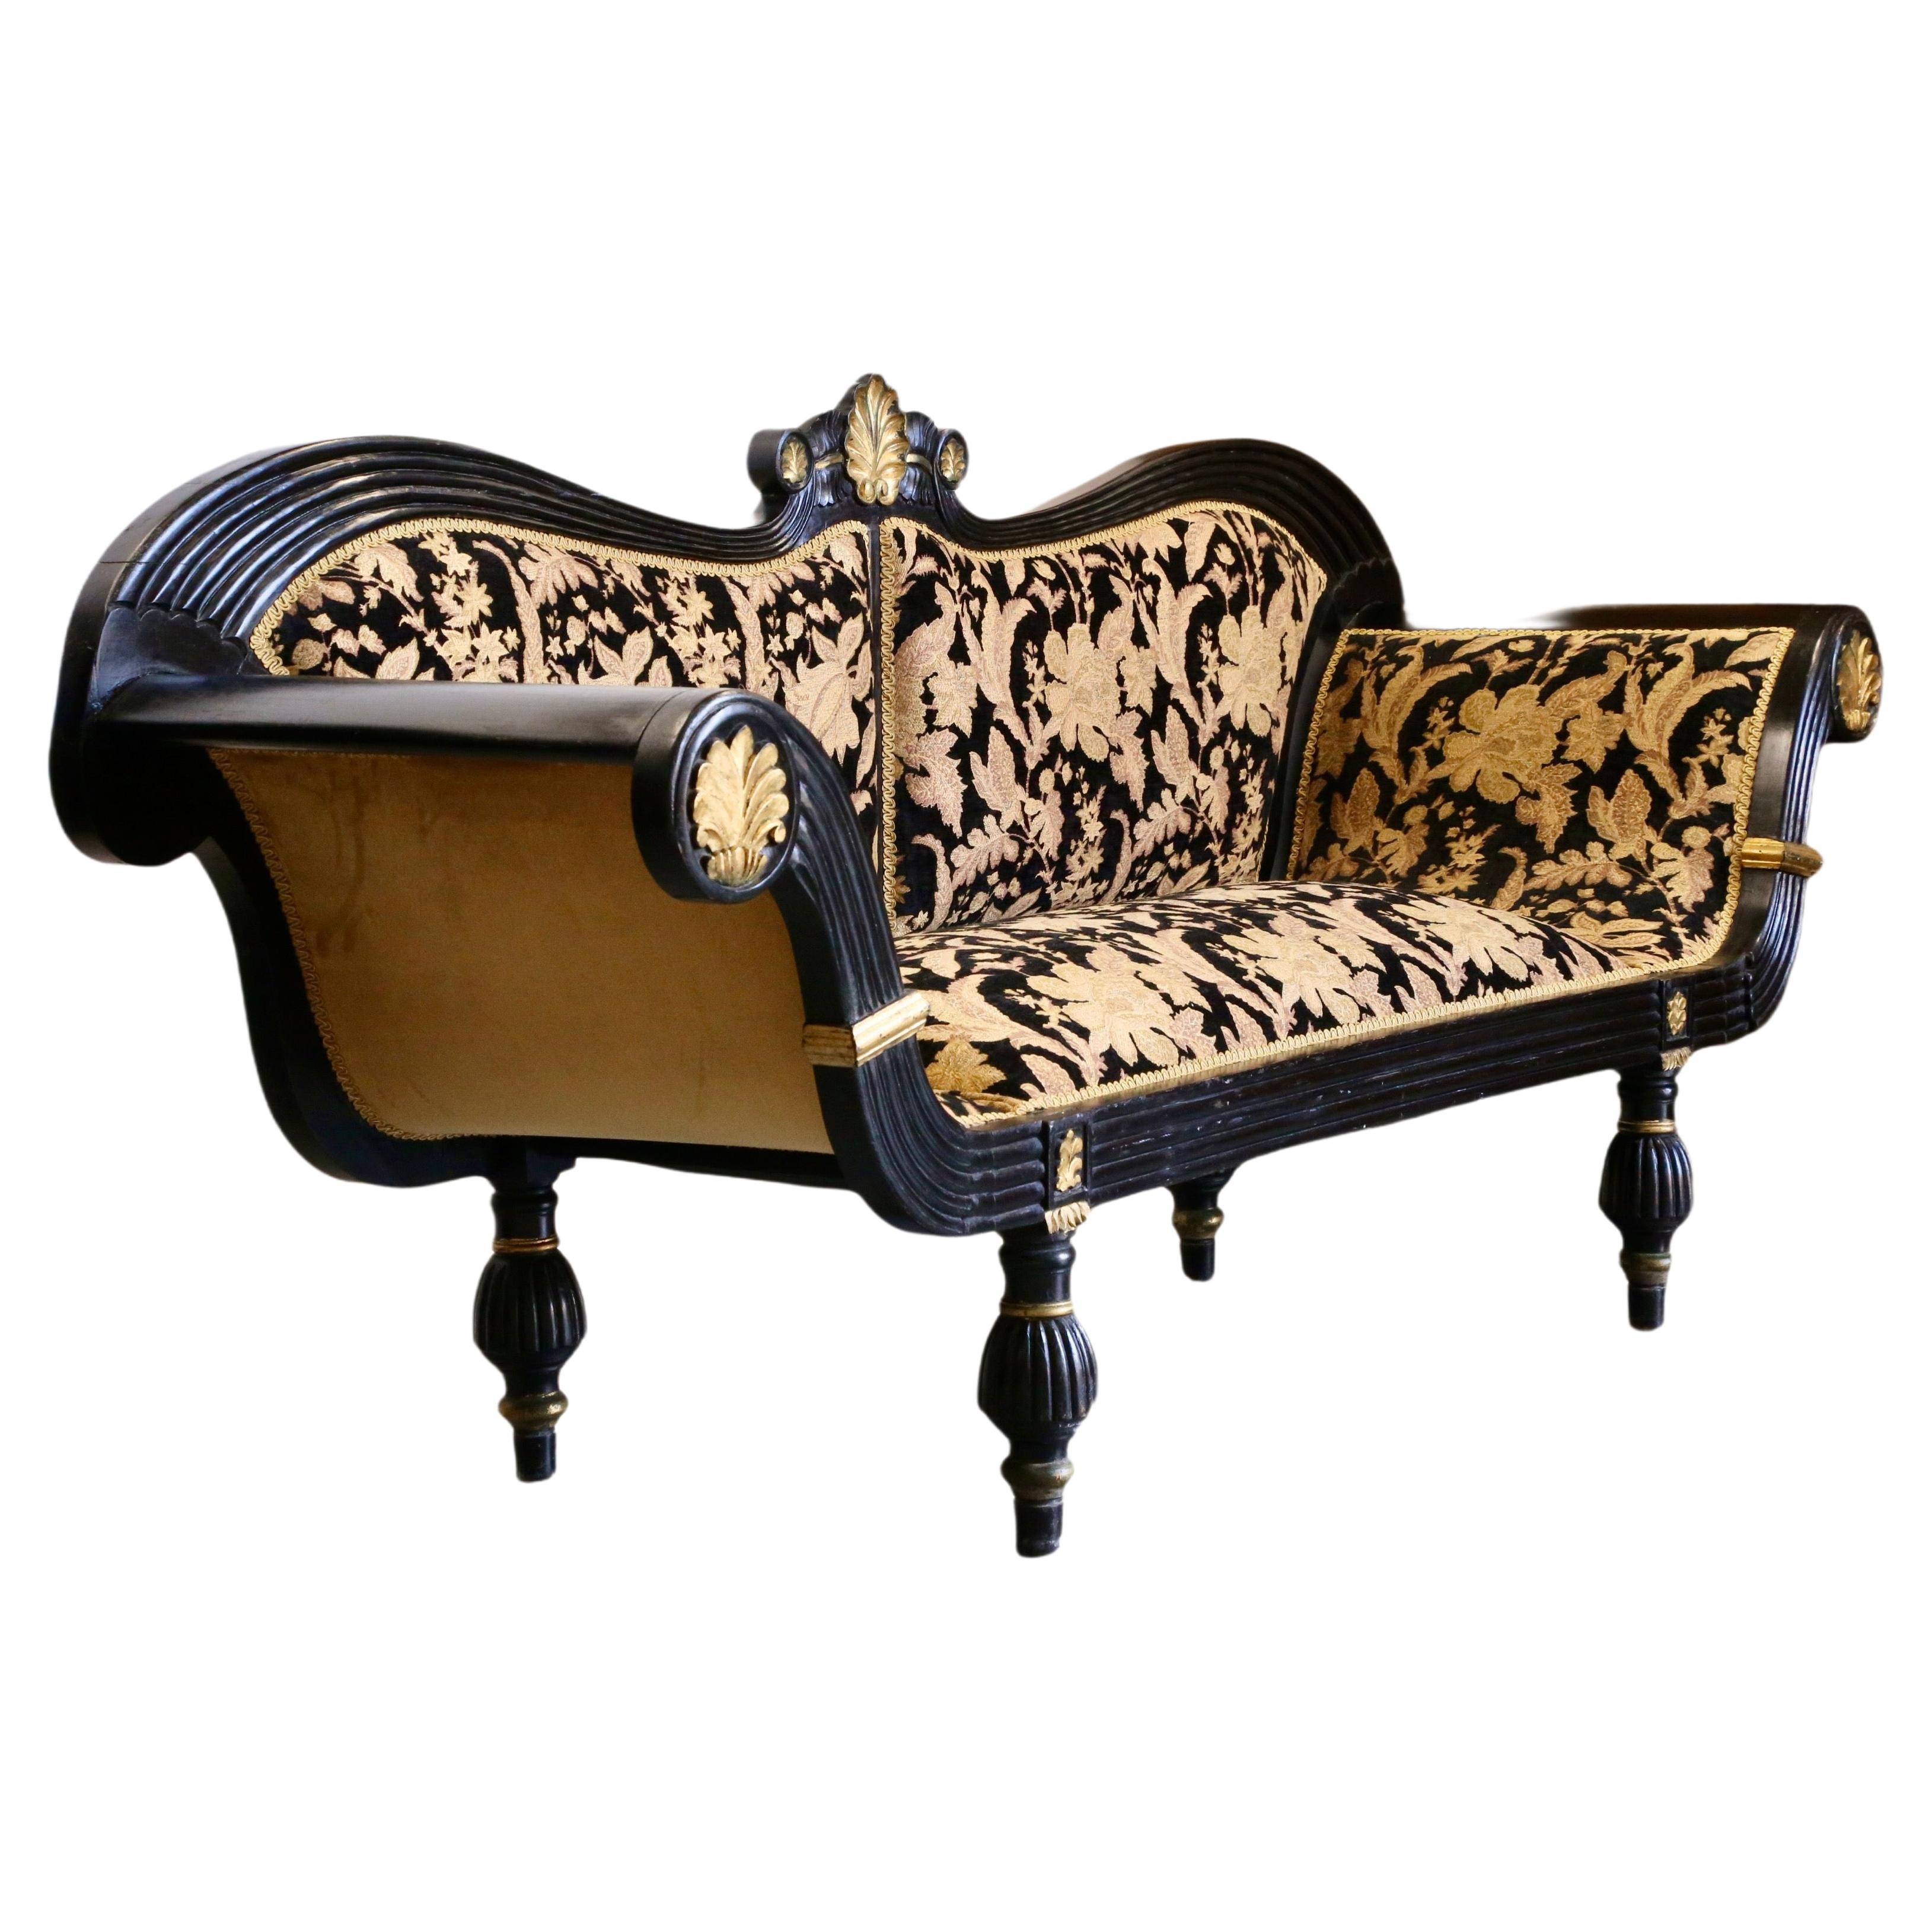 Fine Antique Empire / Regency Carved Ebonised Double Ended Couch For Sale